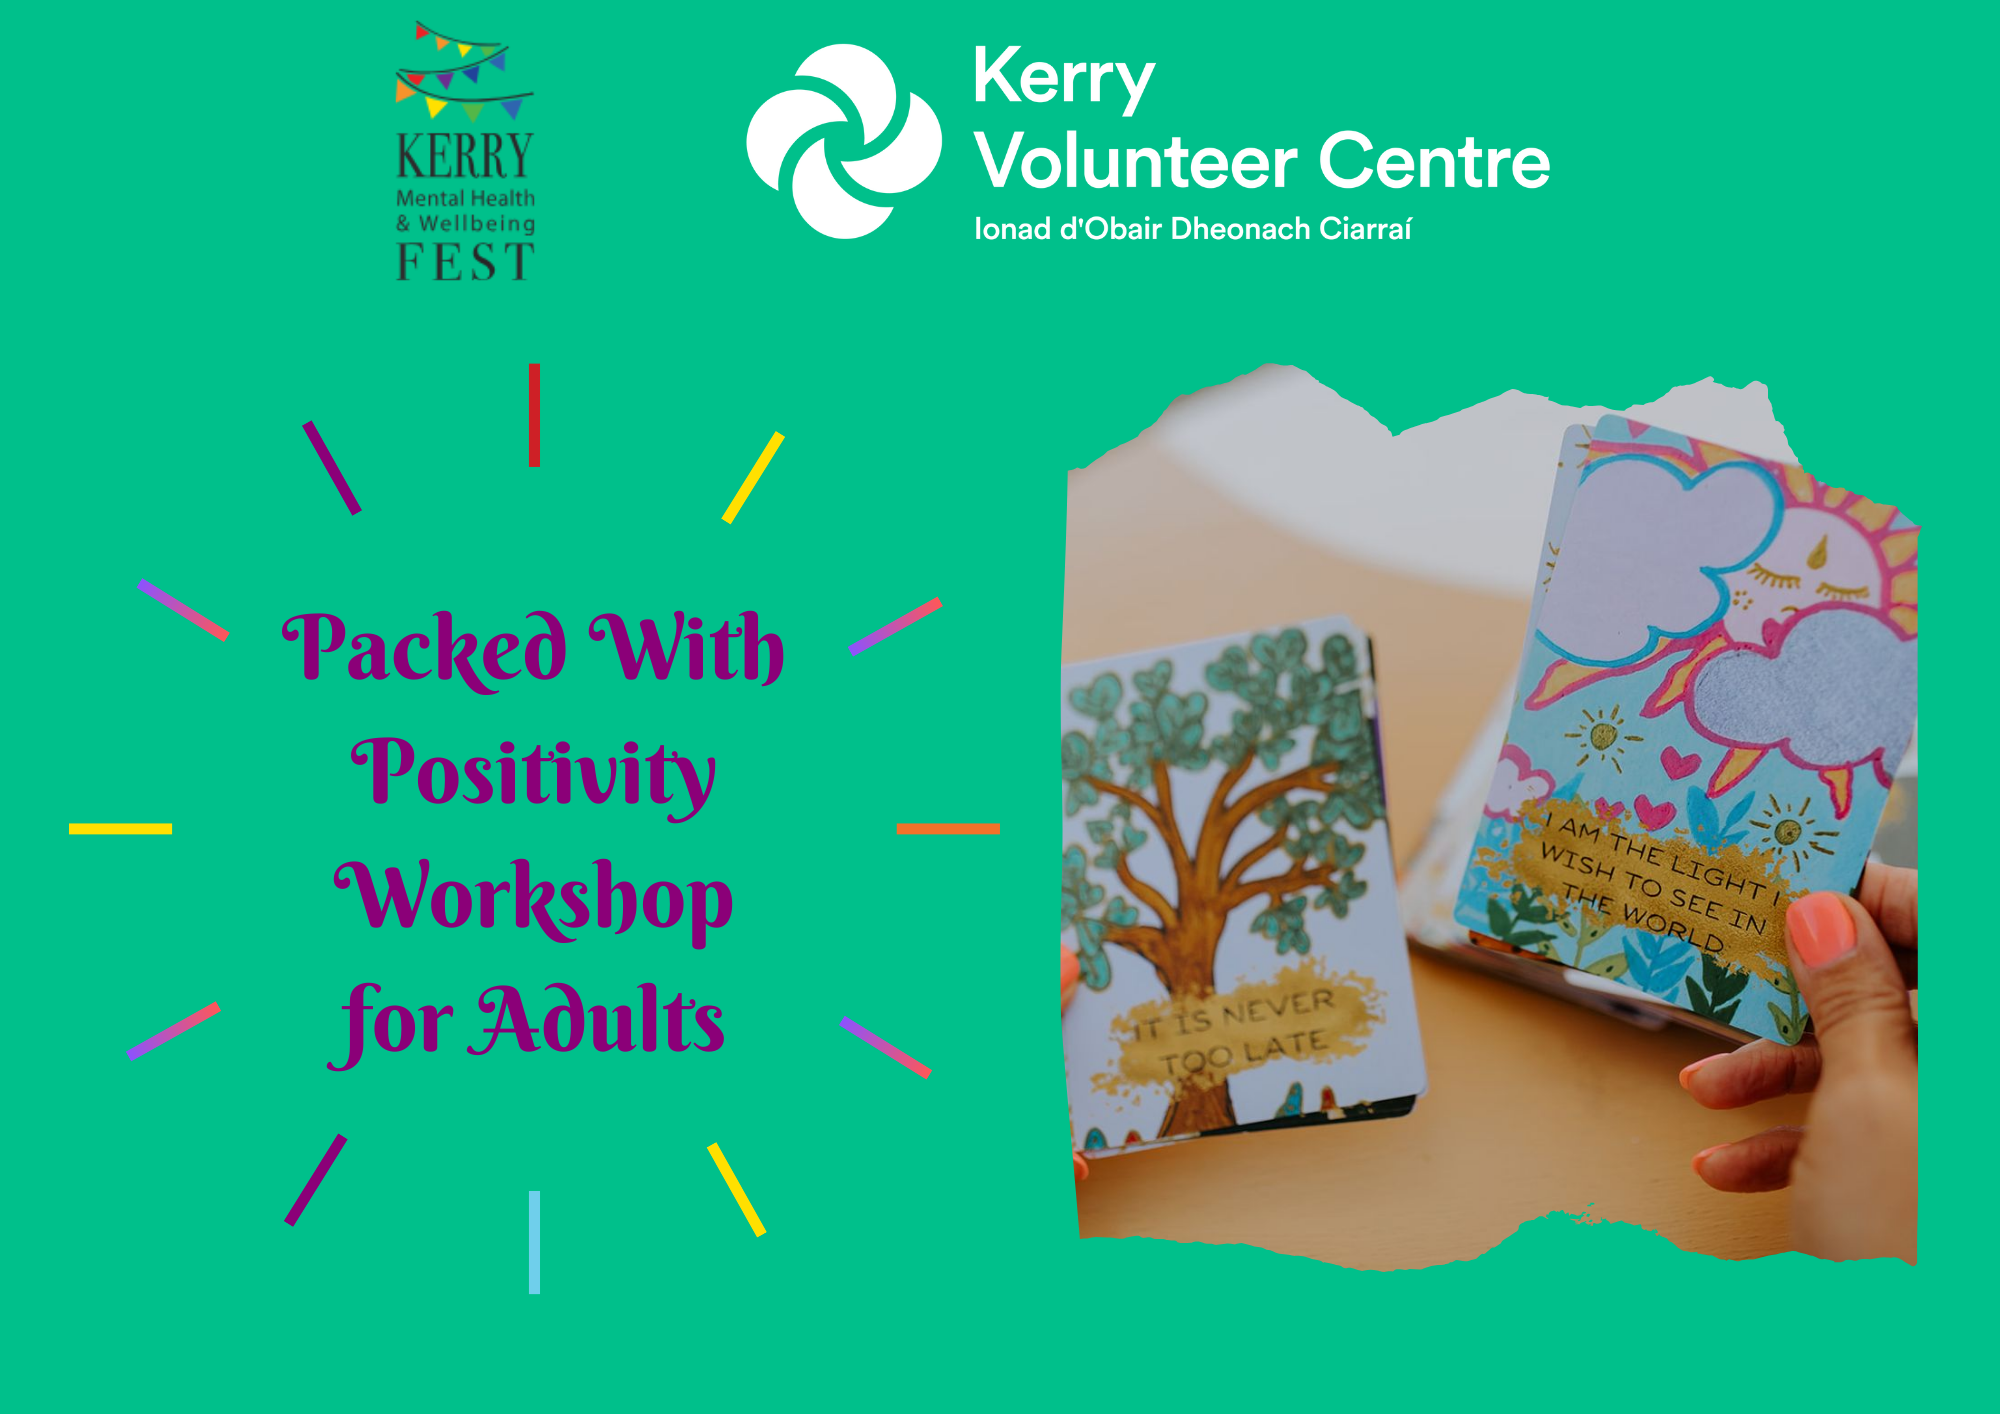 Packed With Positivity- Adult Workshop:4pm to 6pm event at Kerry Mental Health & Wellbeing Fest 2022